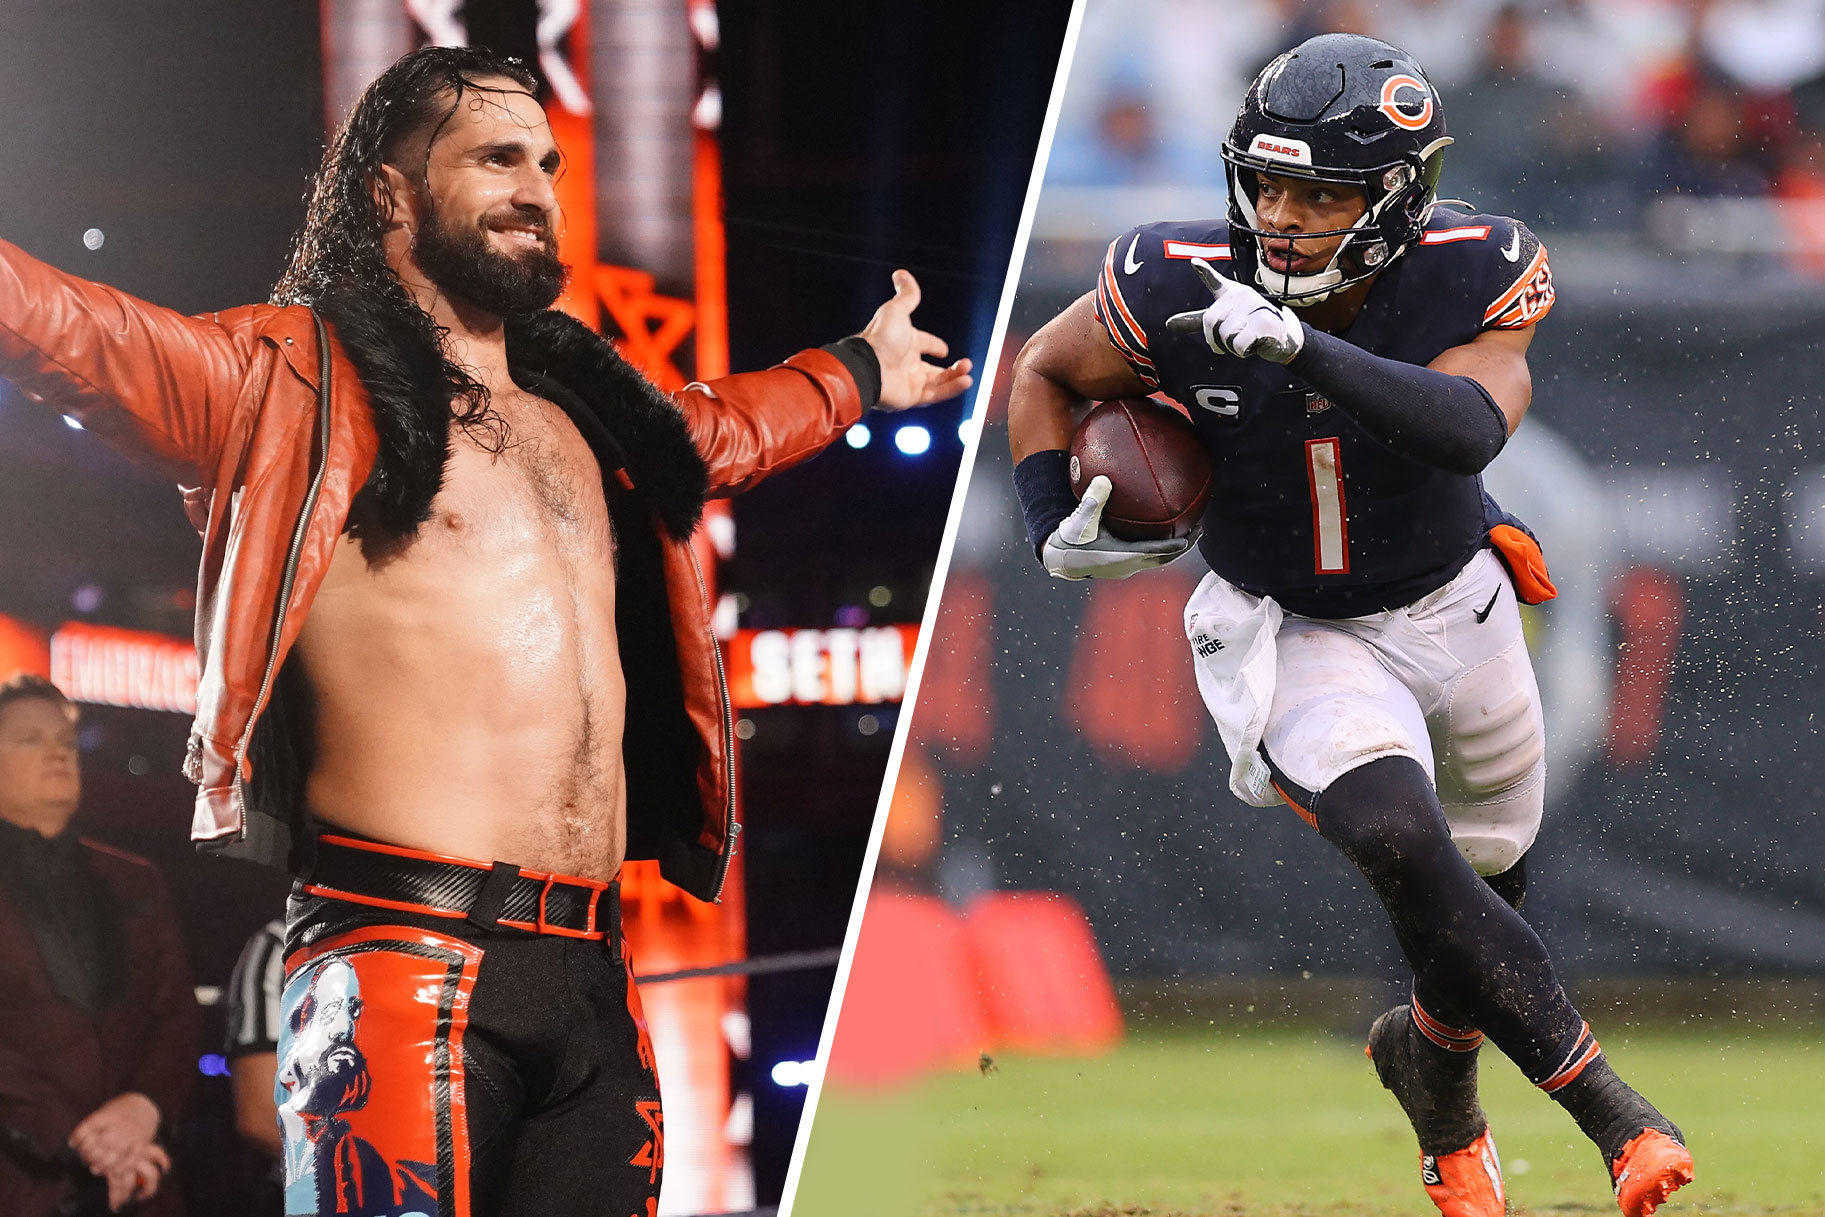 Seth Rollins Is A Massive Fan Of The NFL Team The Chicago Bears